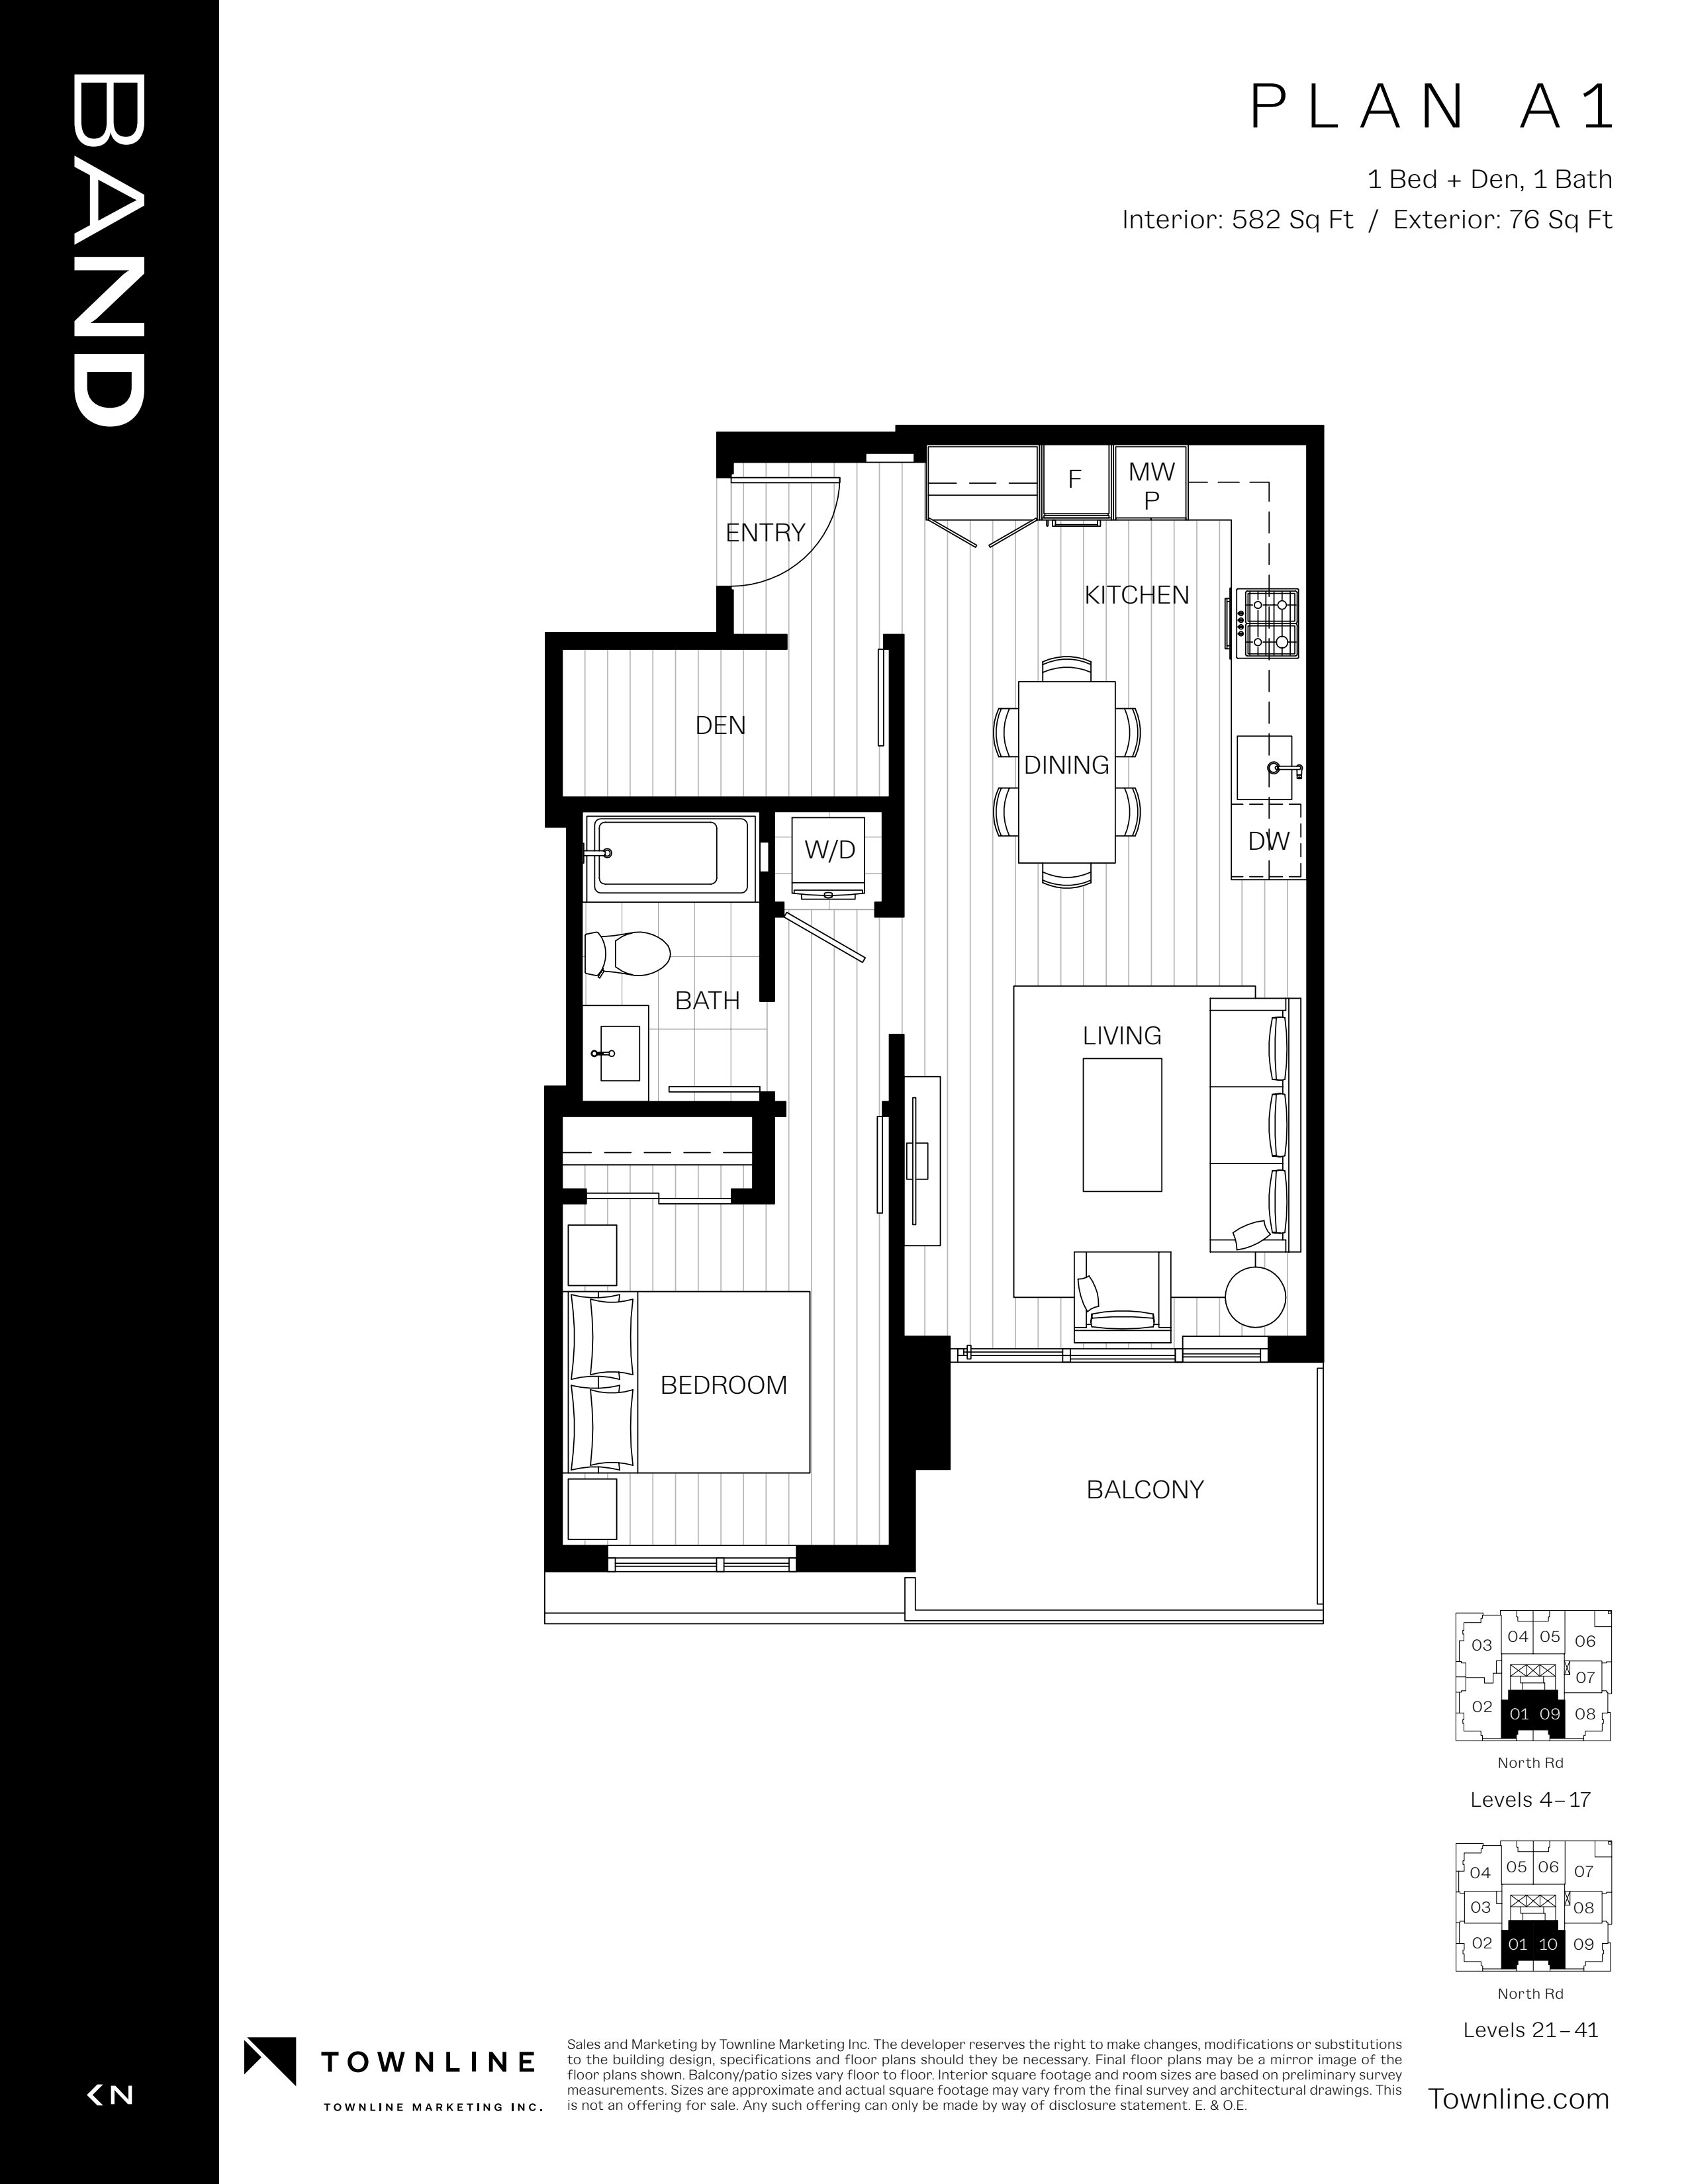  Floor Plan of Band Condos with undefined beds